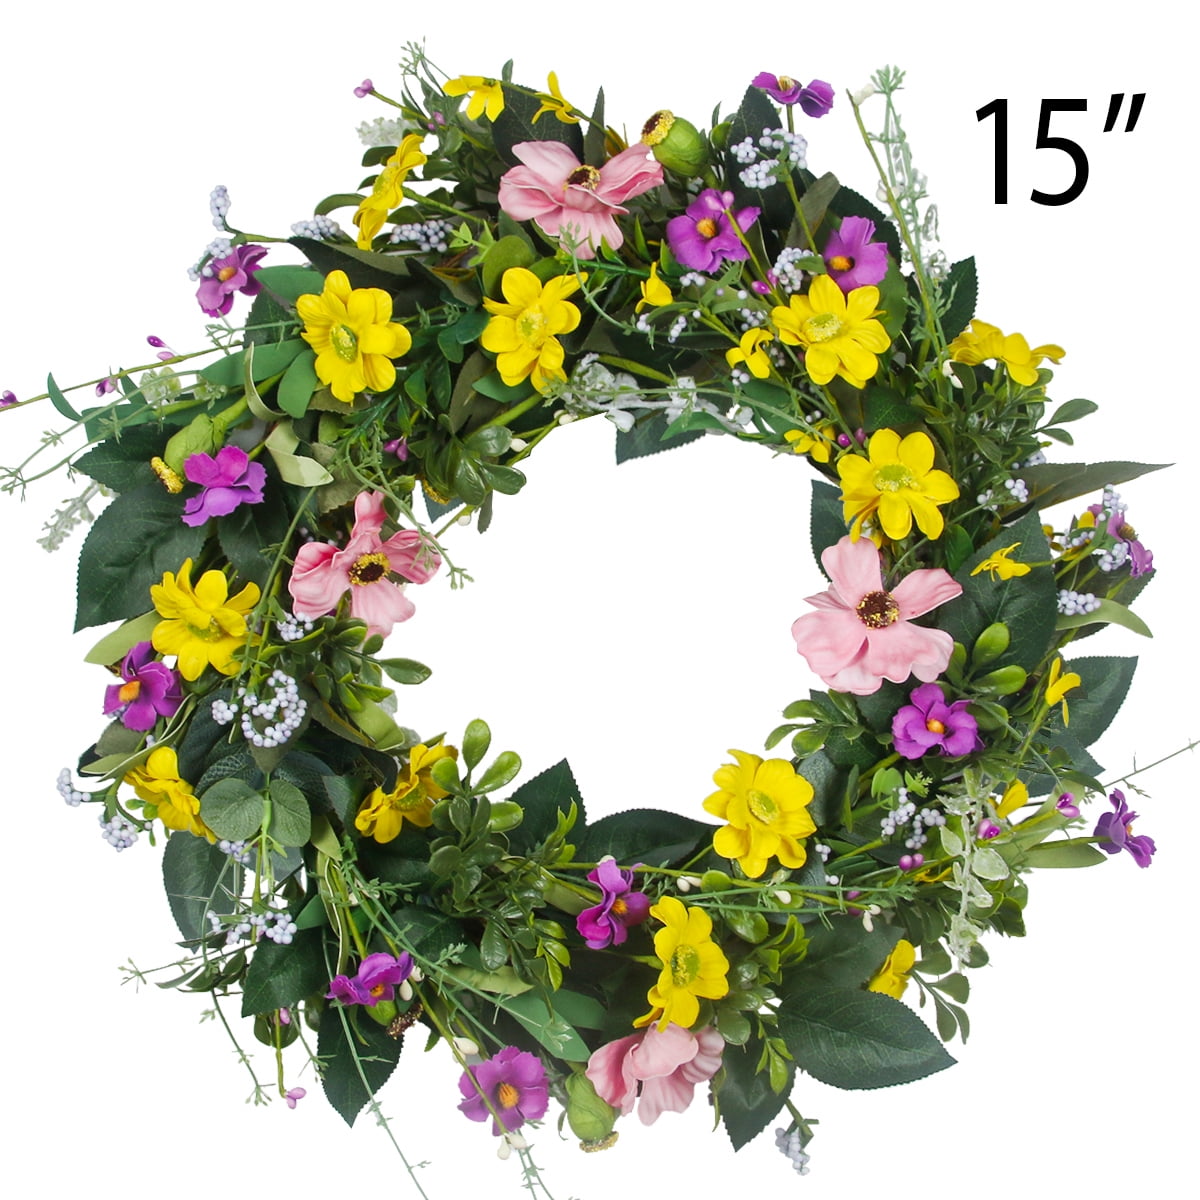 19" Dia Daisy Greenery Flowers Twig Door Wall Wreath Hanging Spring Floral Decor 